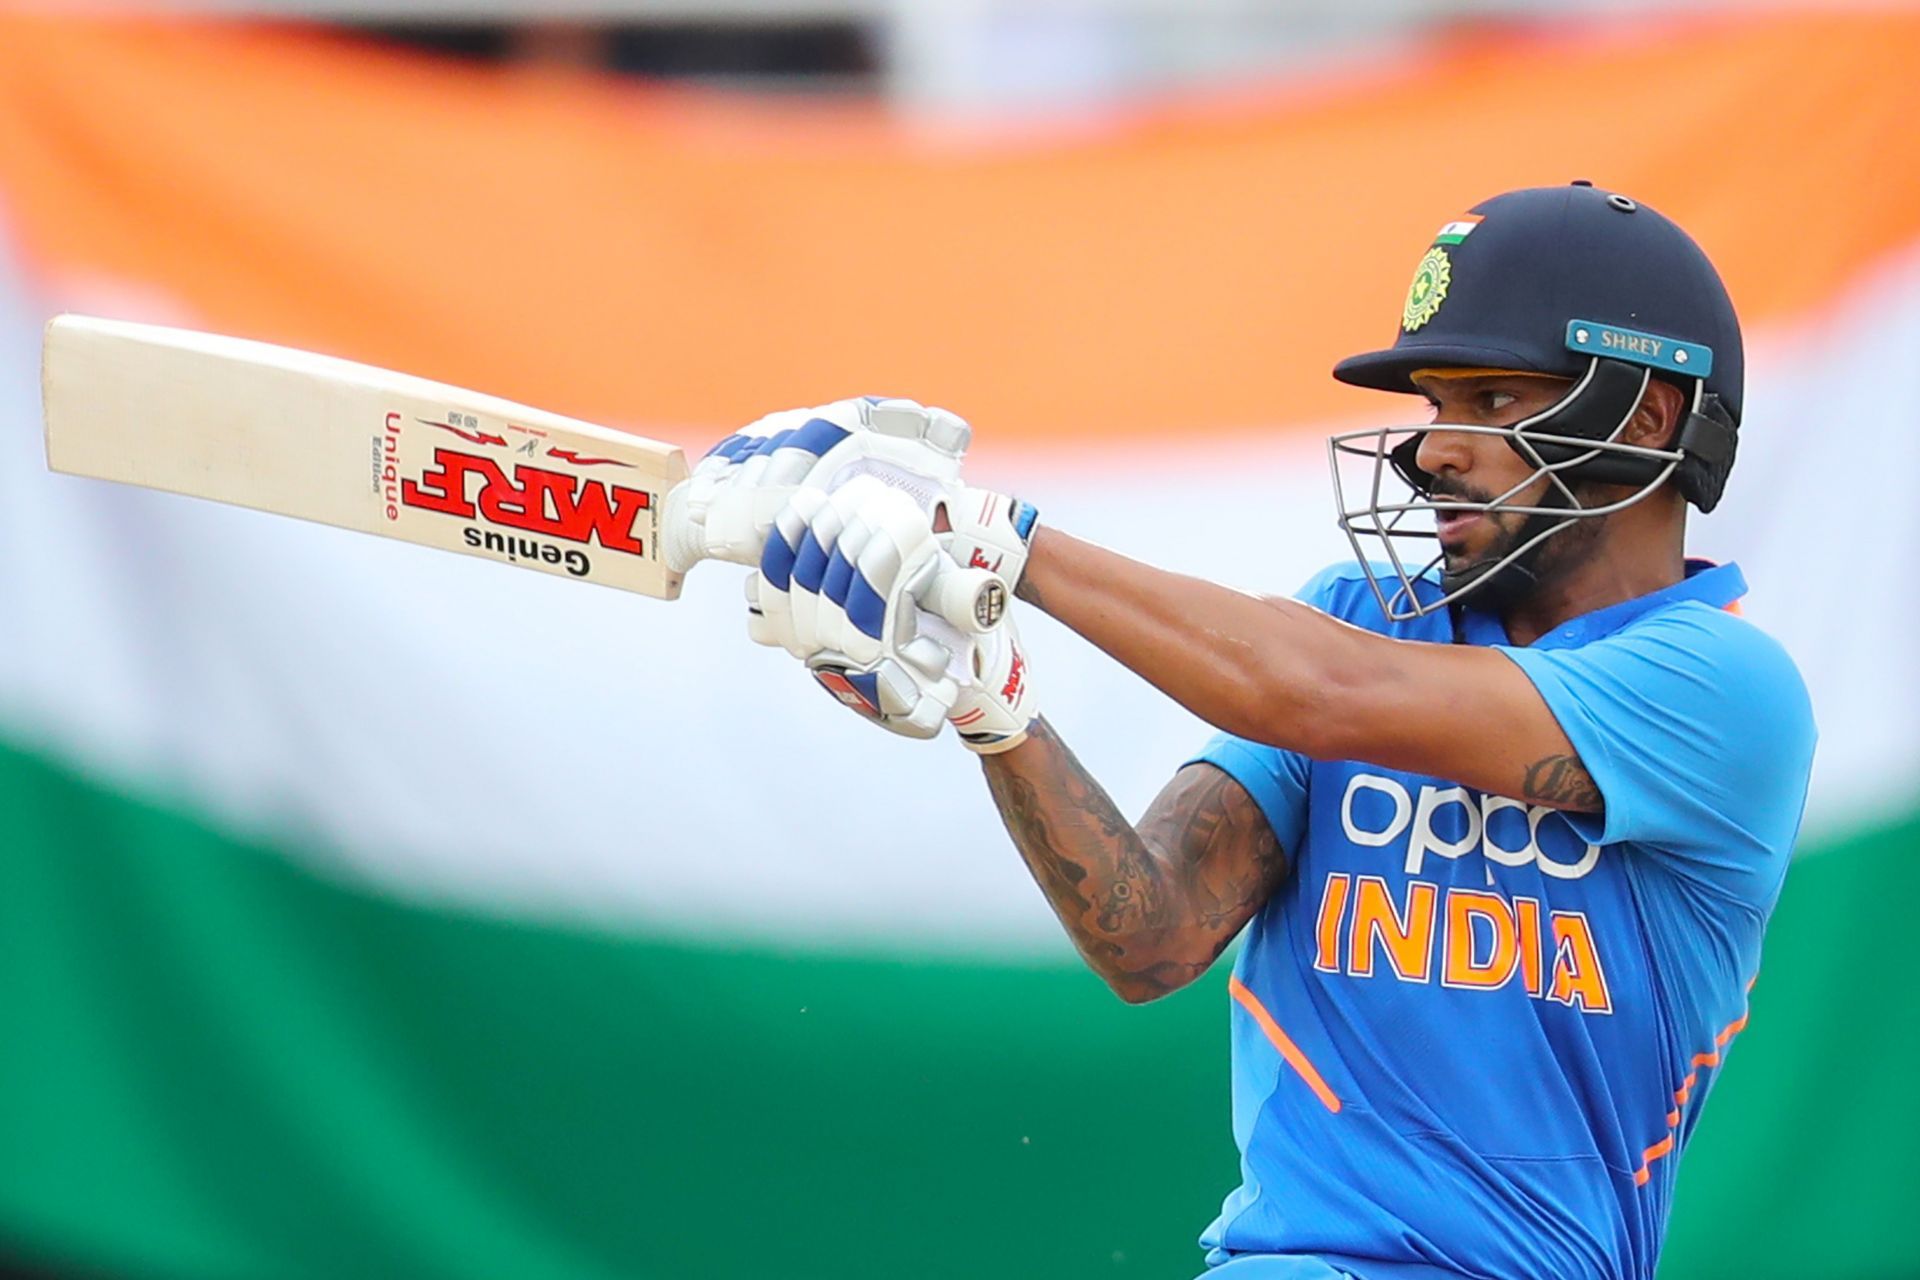 Shikhar Dhawan scored only two runs in that match